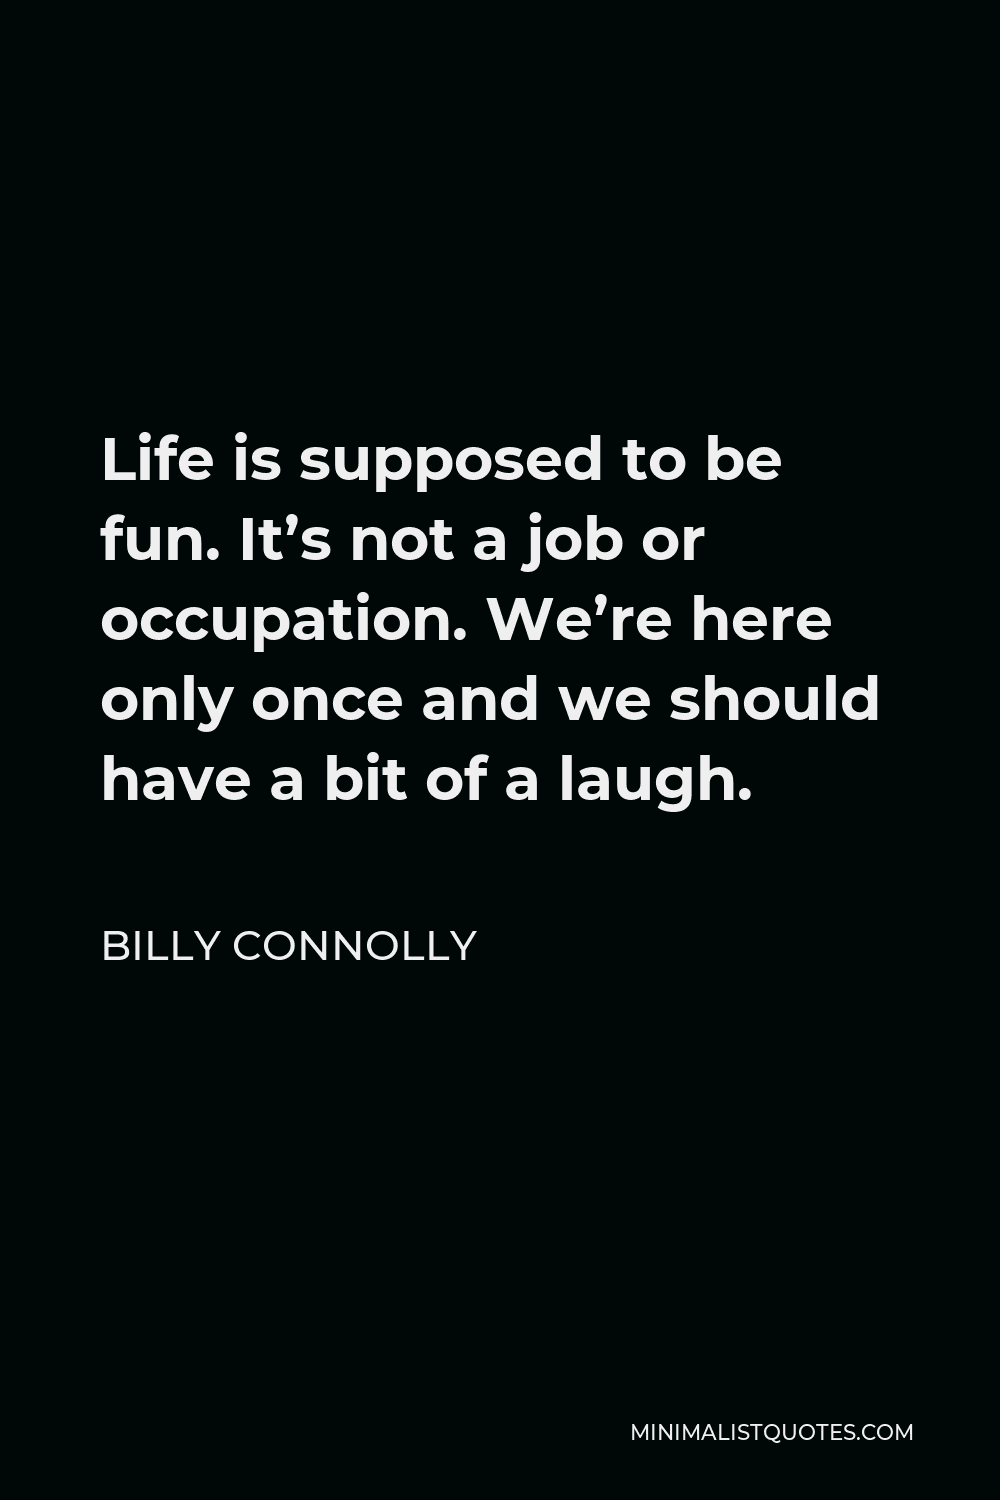 Billy Connolly Quote - Life is supposed to be fun. It’s not a job or occupation. We’re here only once and we should have a bit of a laugh.